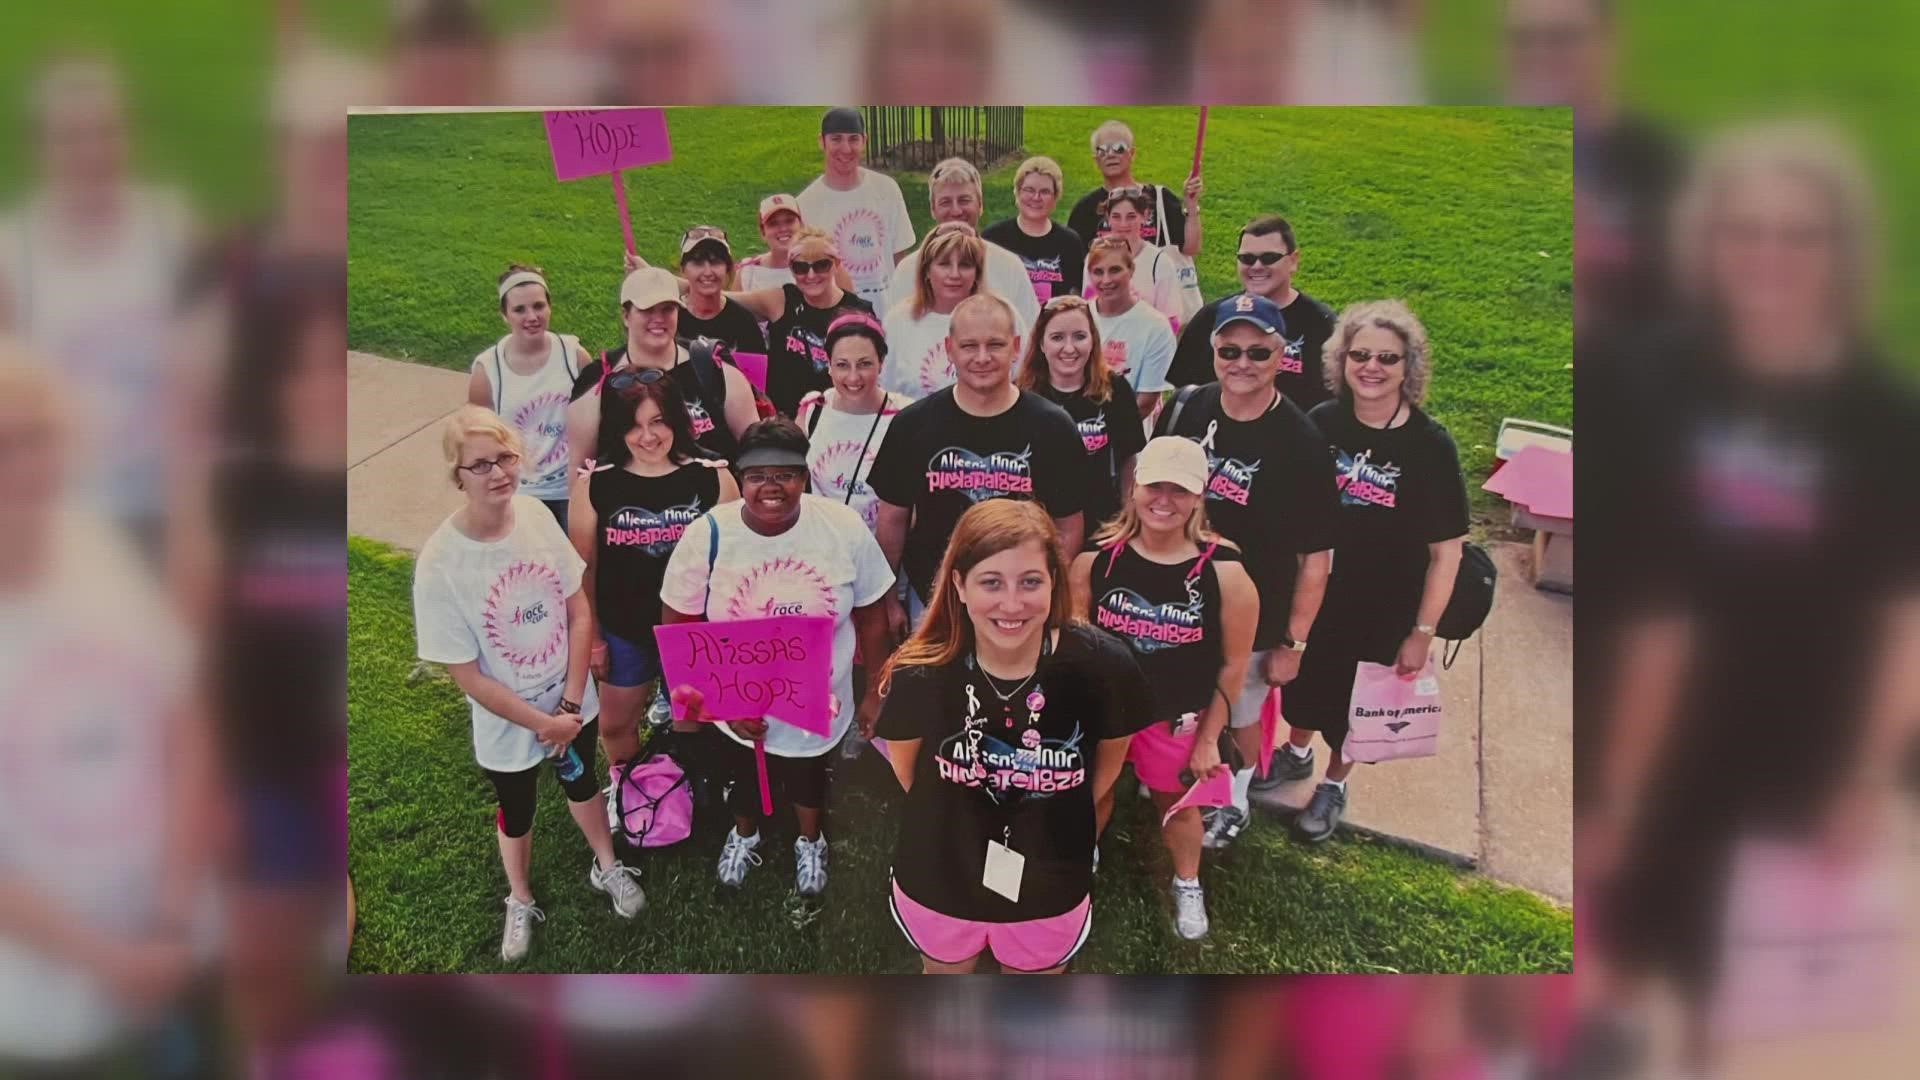 Alissa Schulte was diagnosed with breast cancer at 17. Now, 22 years later, she is helping others fight breast cancer with her nonprofit.